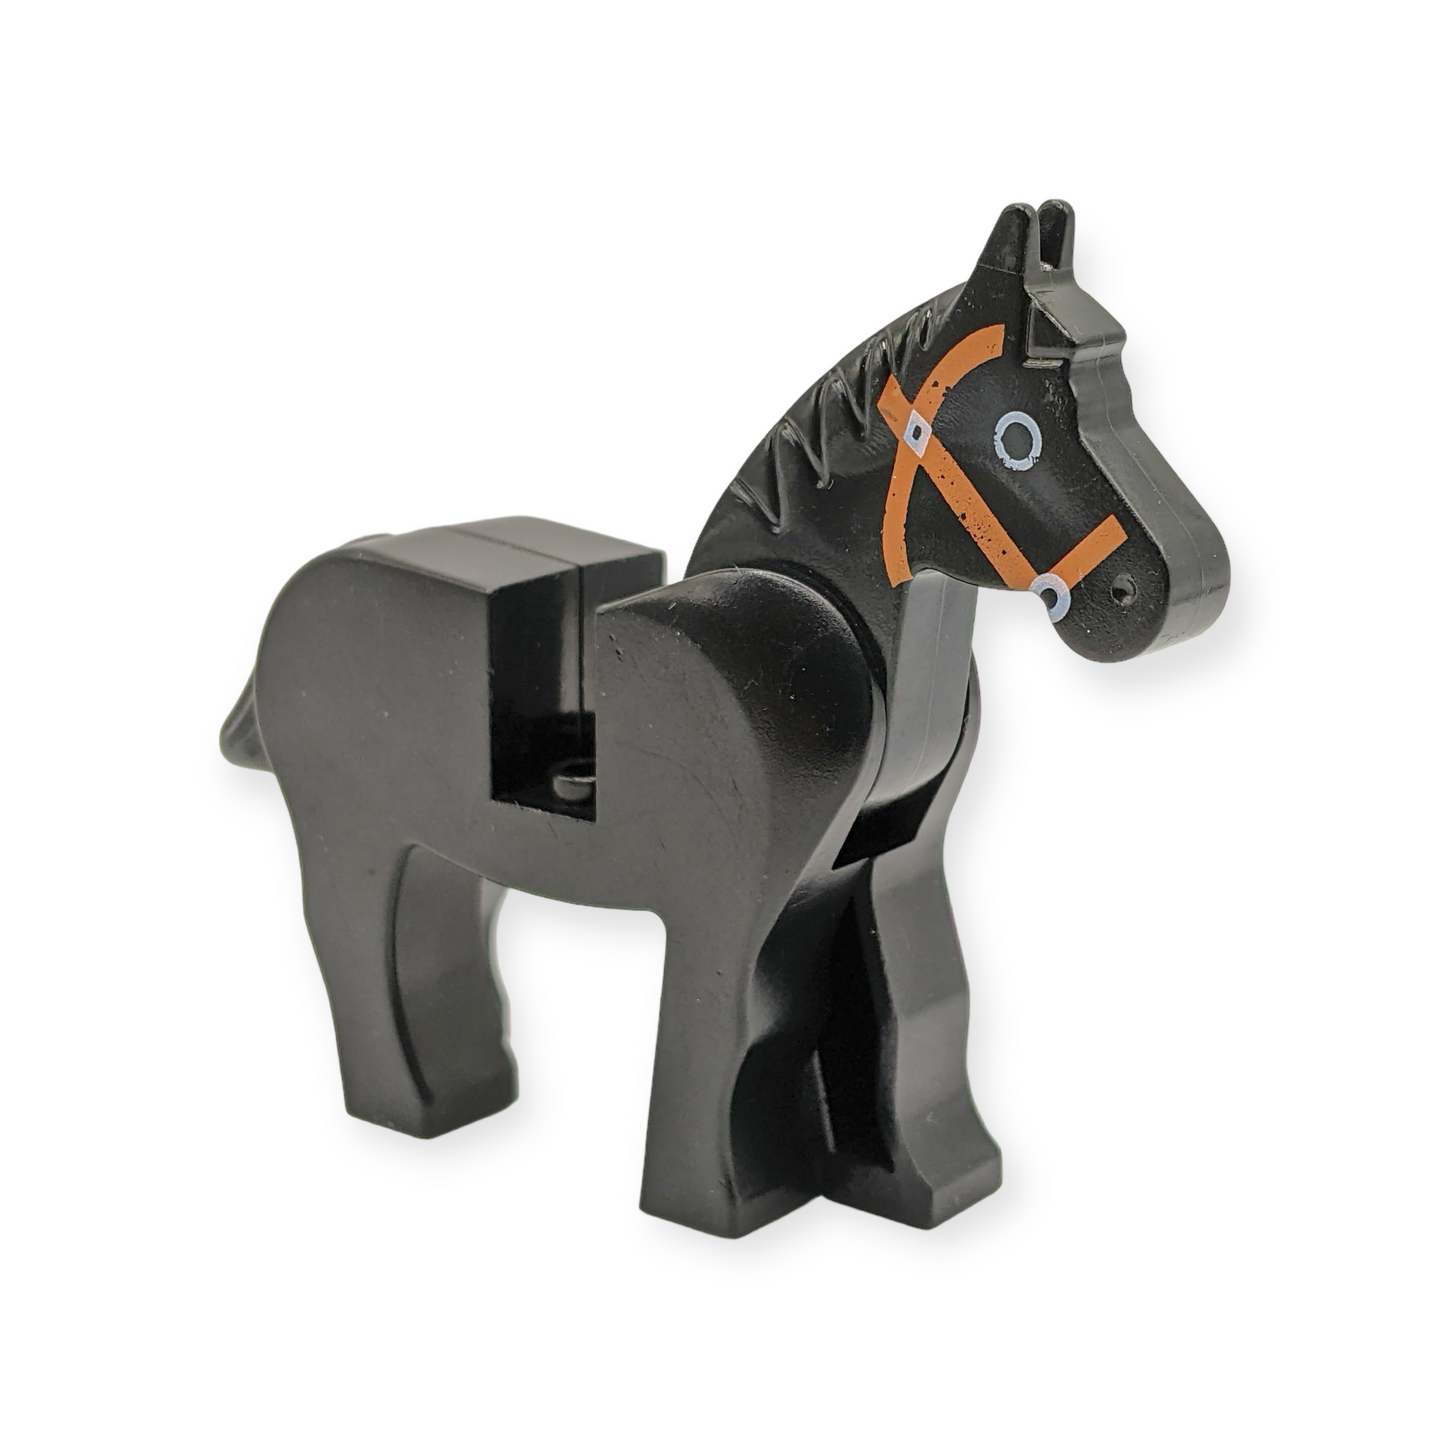 LEGO Horse with Black Eyes Circled with White, Brown Bridle Pattern